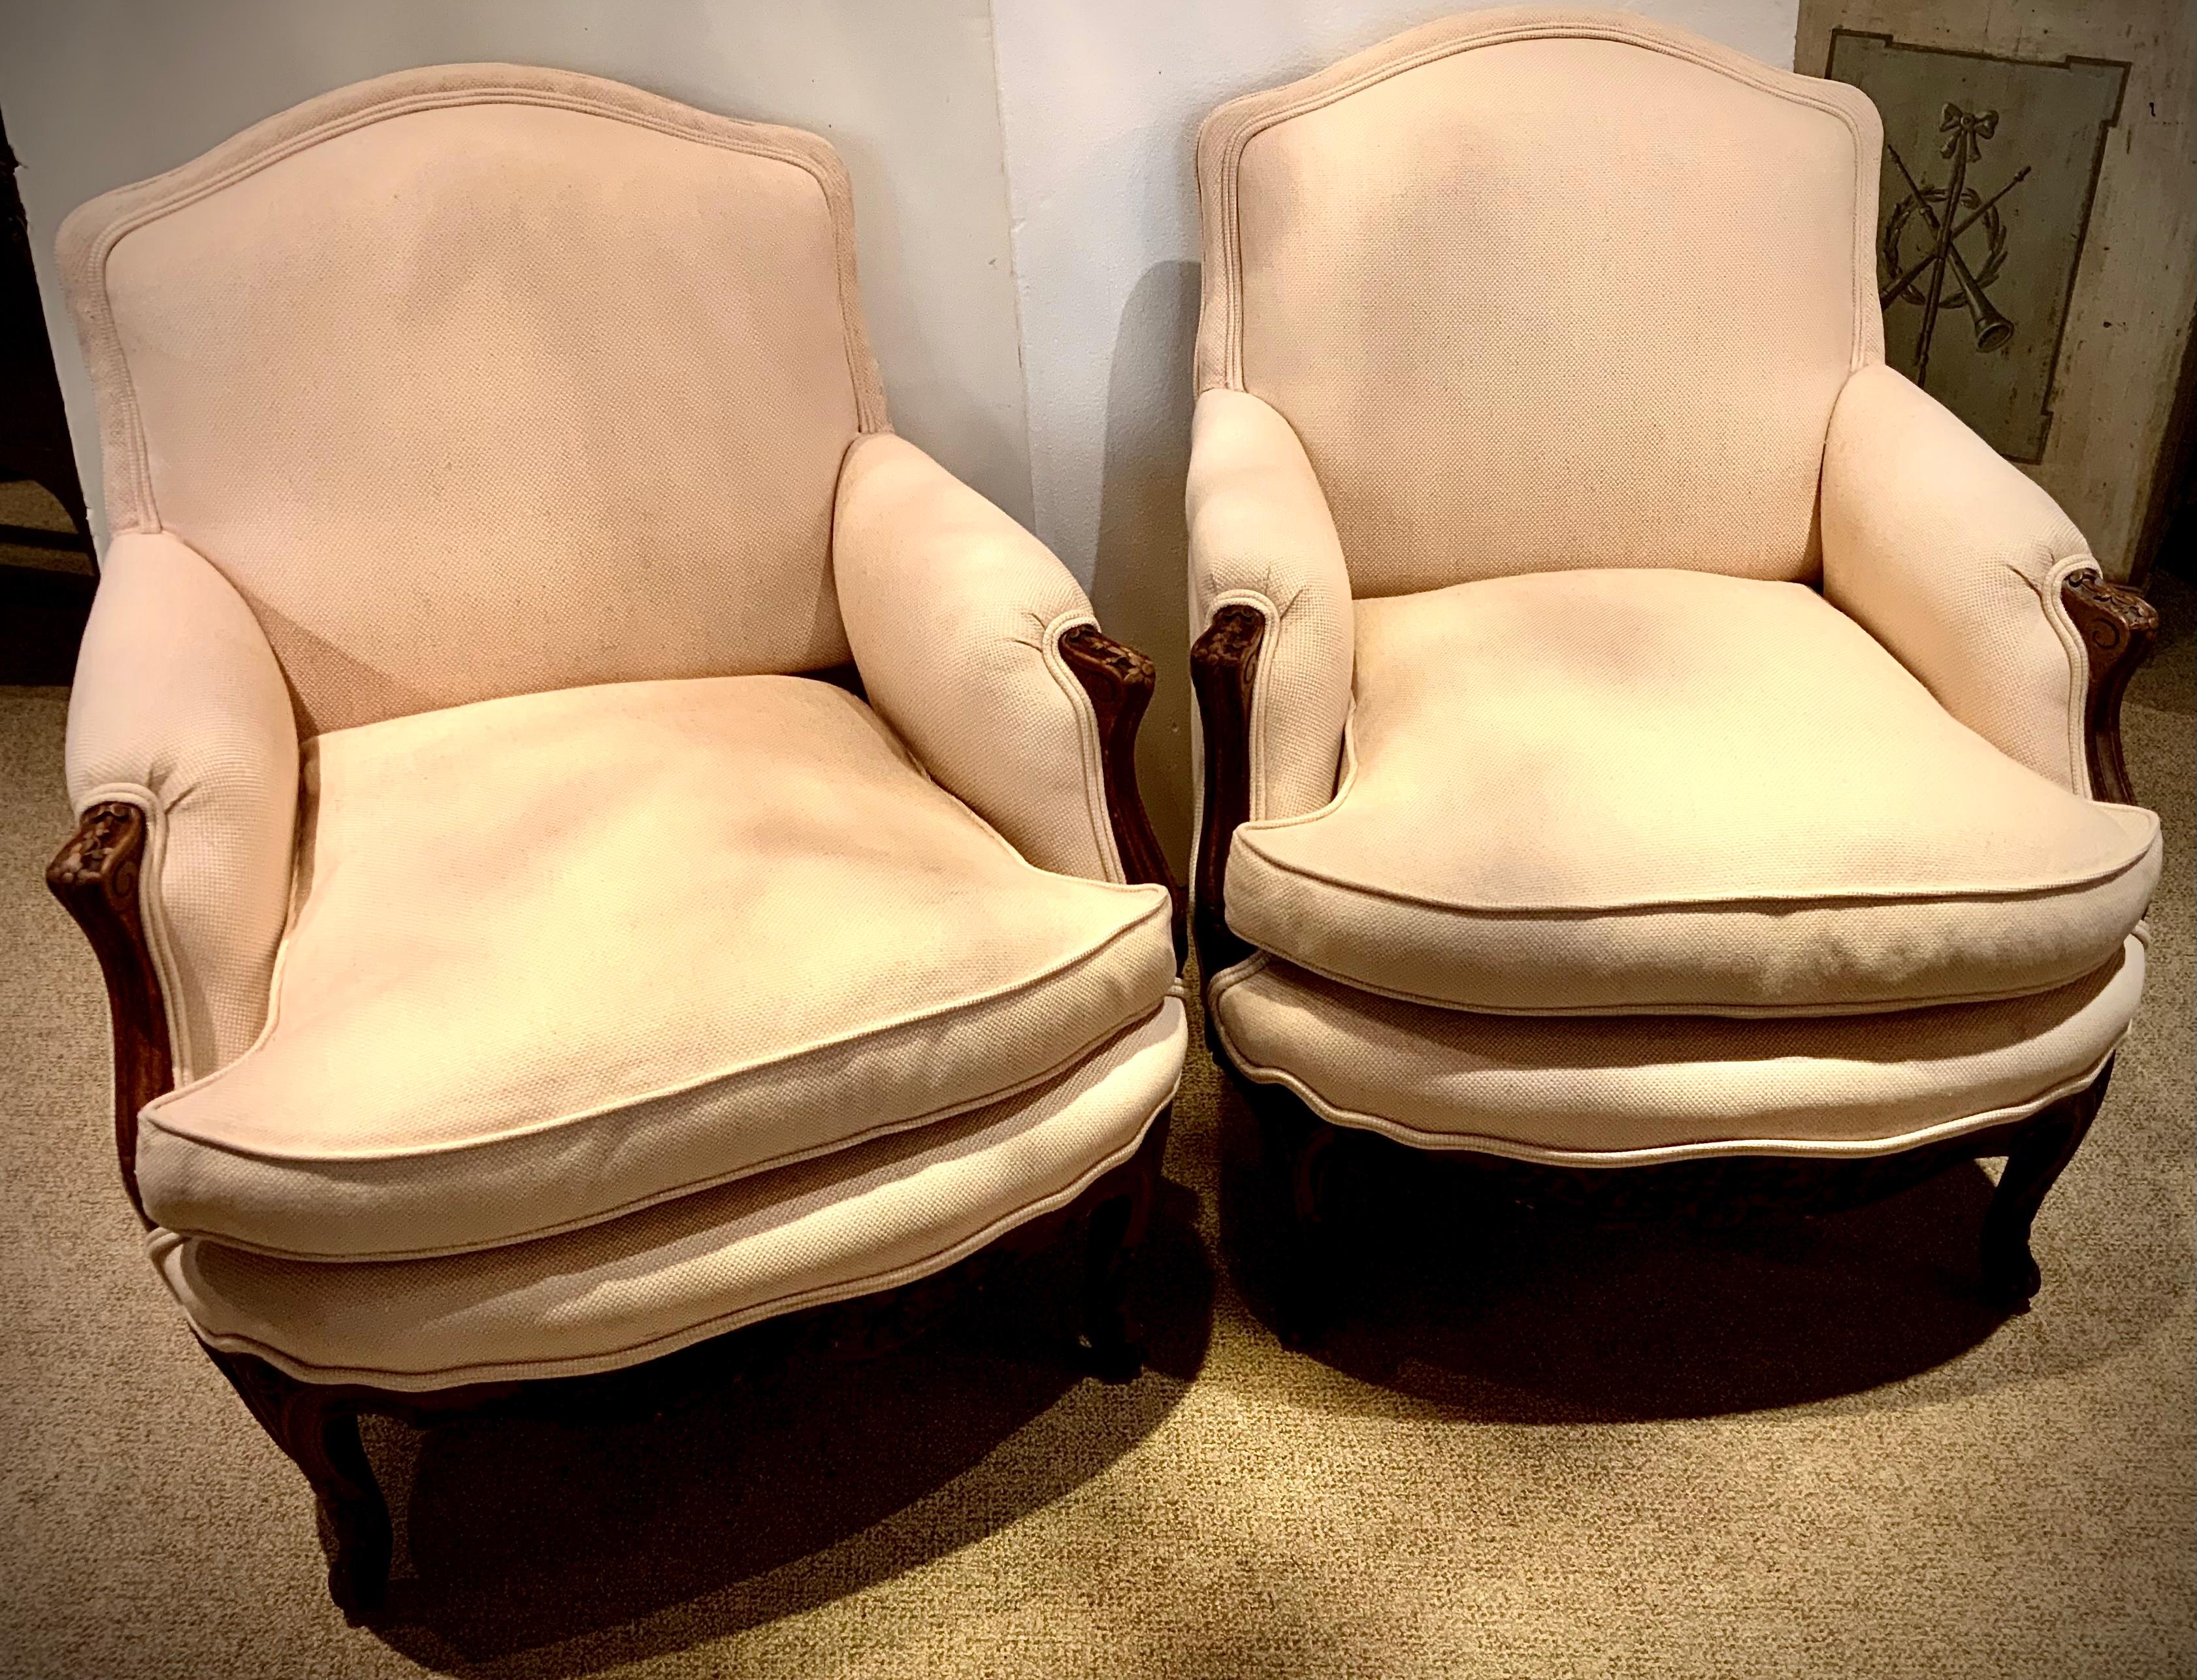 20th Century Pair of French Bergere Chairs, Louis XV-Style in Cream / White Hues